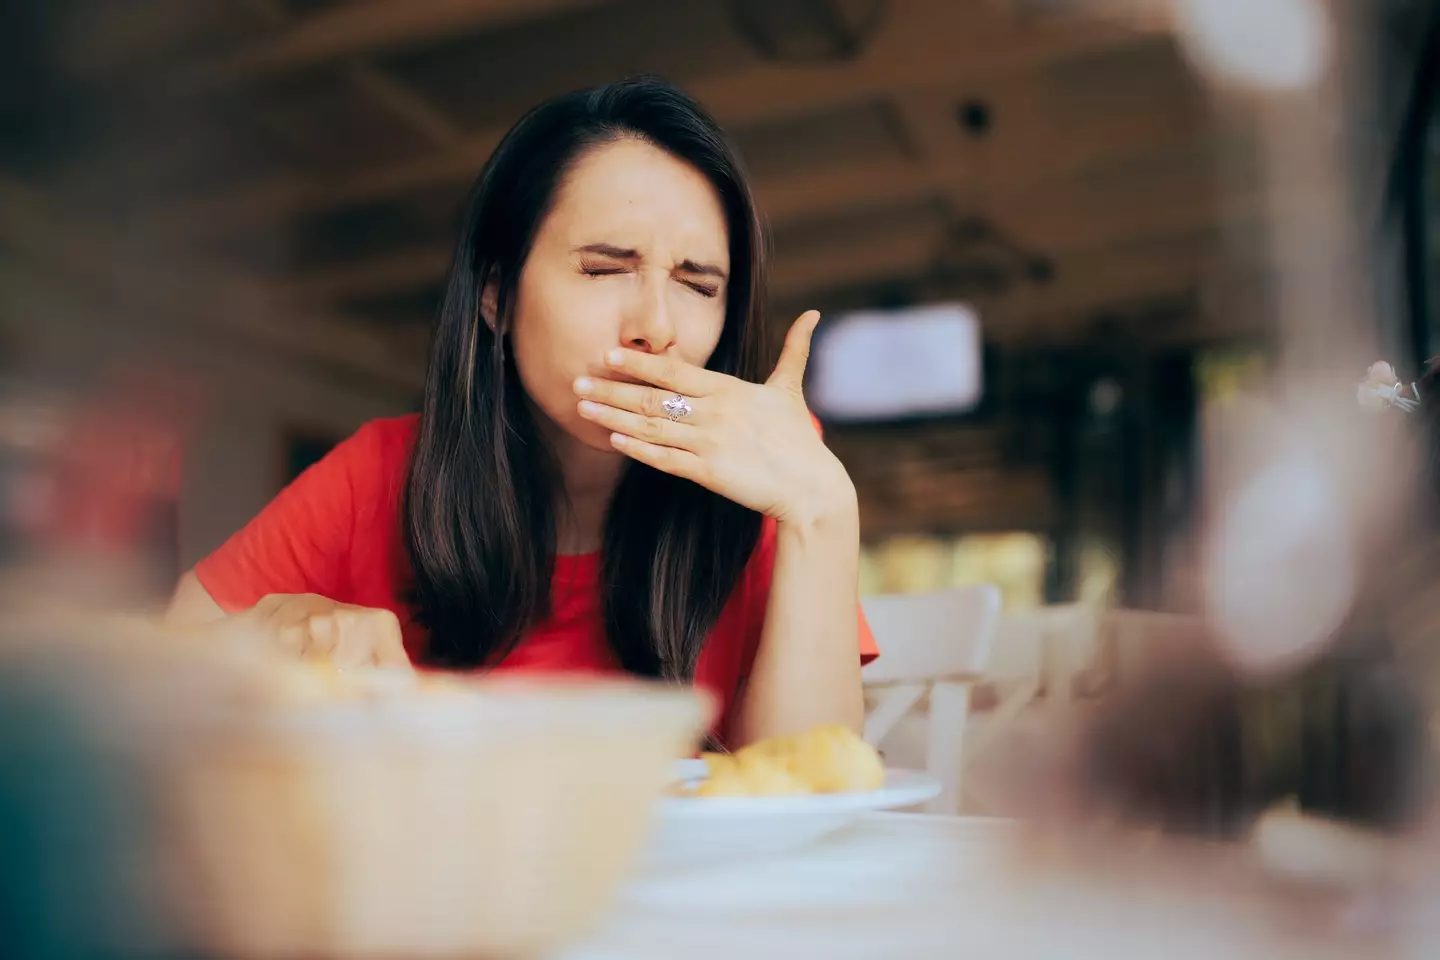 Burps can happen after eating too fast.